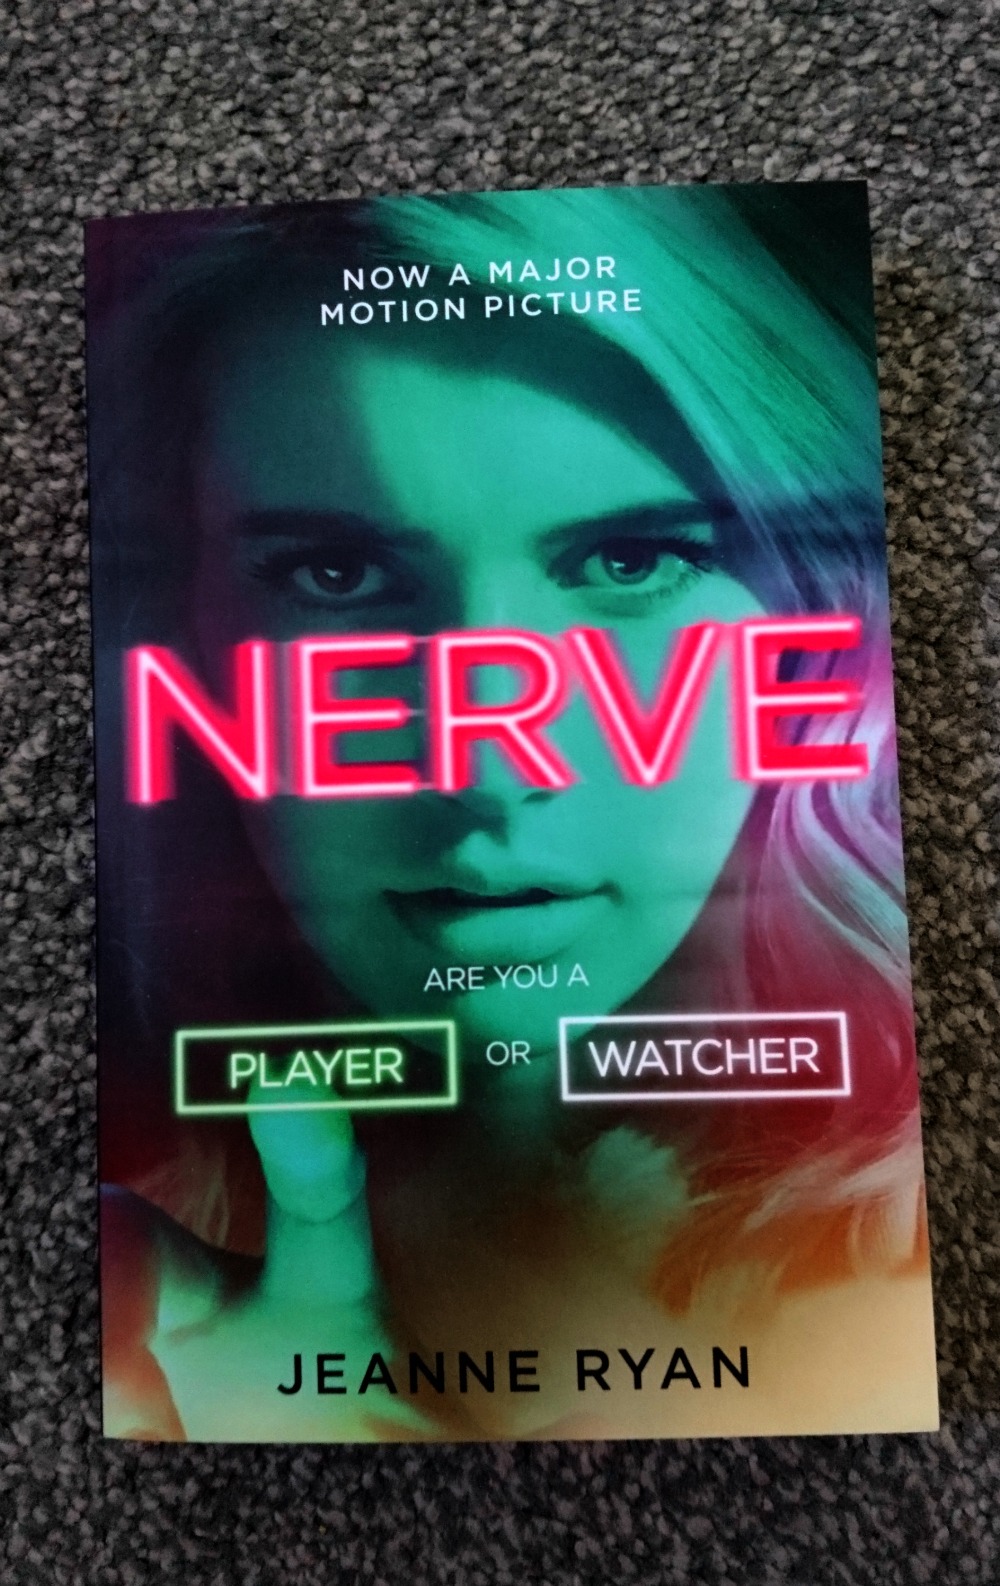 Nerve by Jeanne Ryan book cover